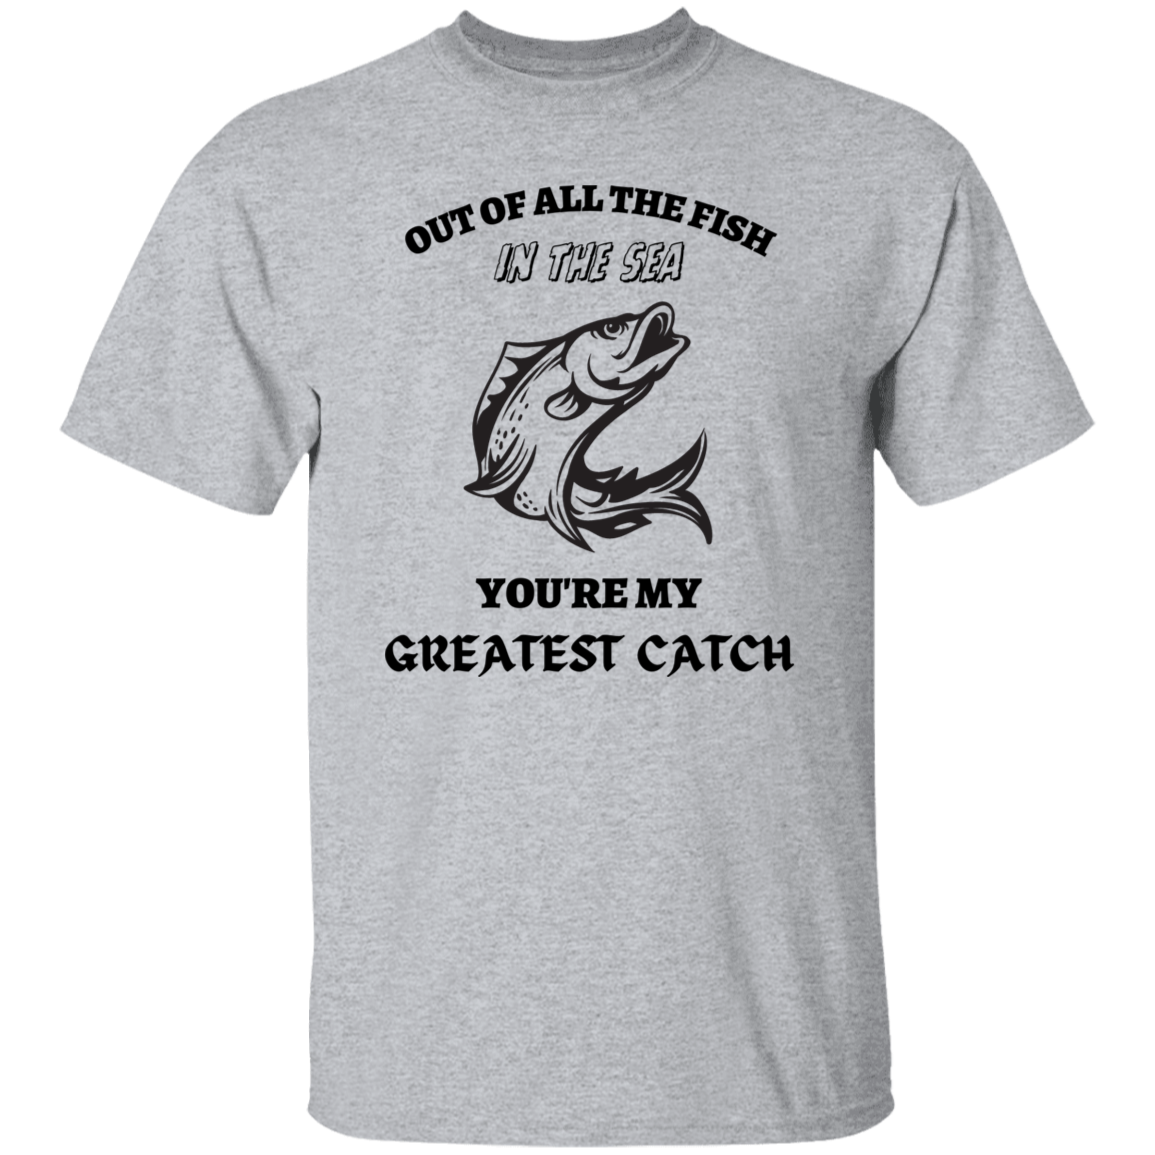 You're My Greatest Catch T-Shirt